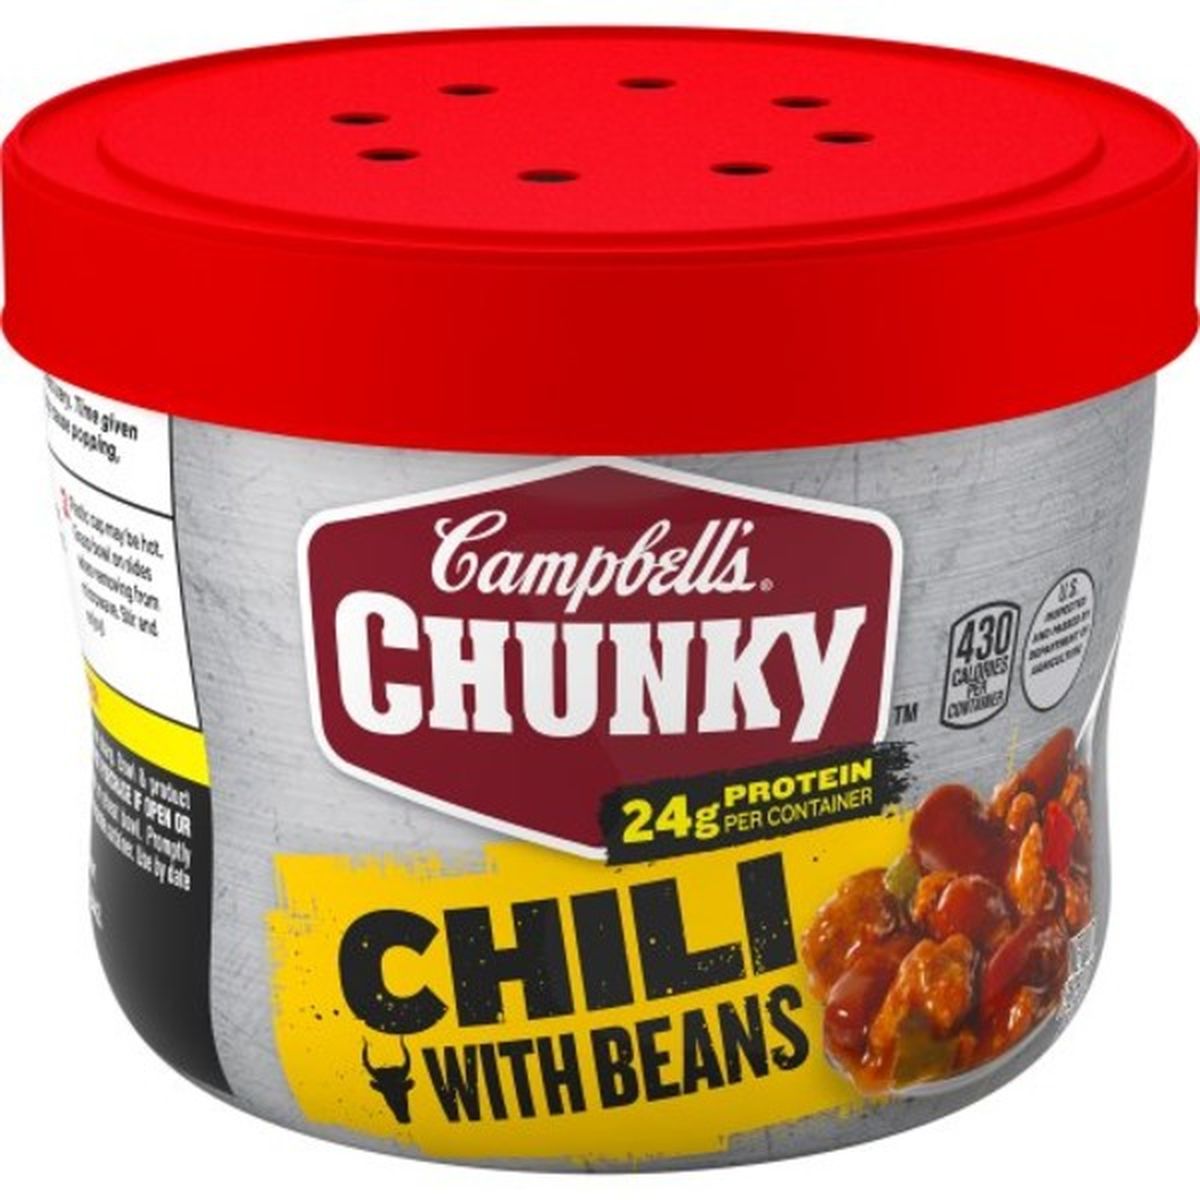 Calories in Campbell'ss Chunkys Chunky Chili with Beans